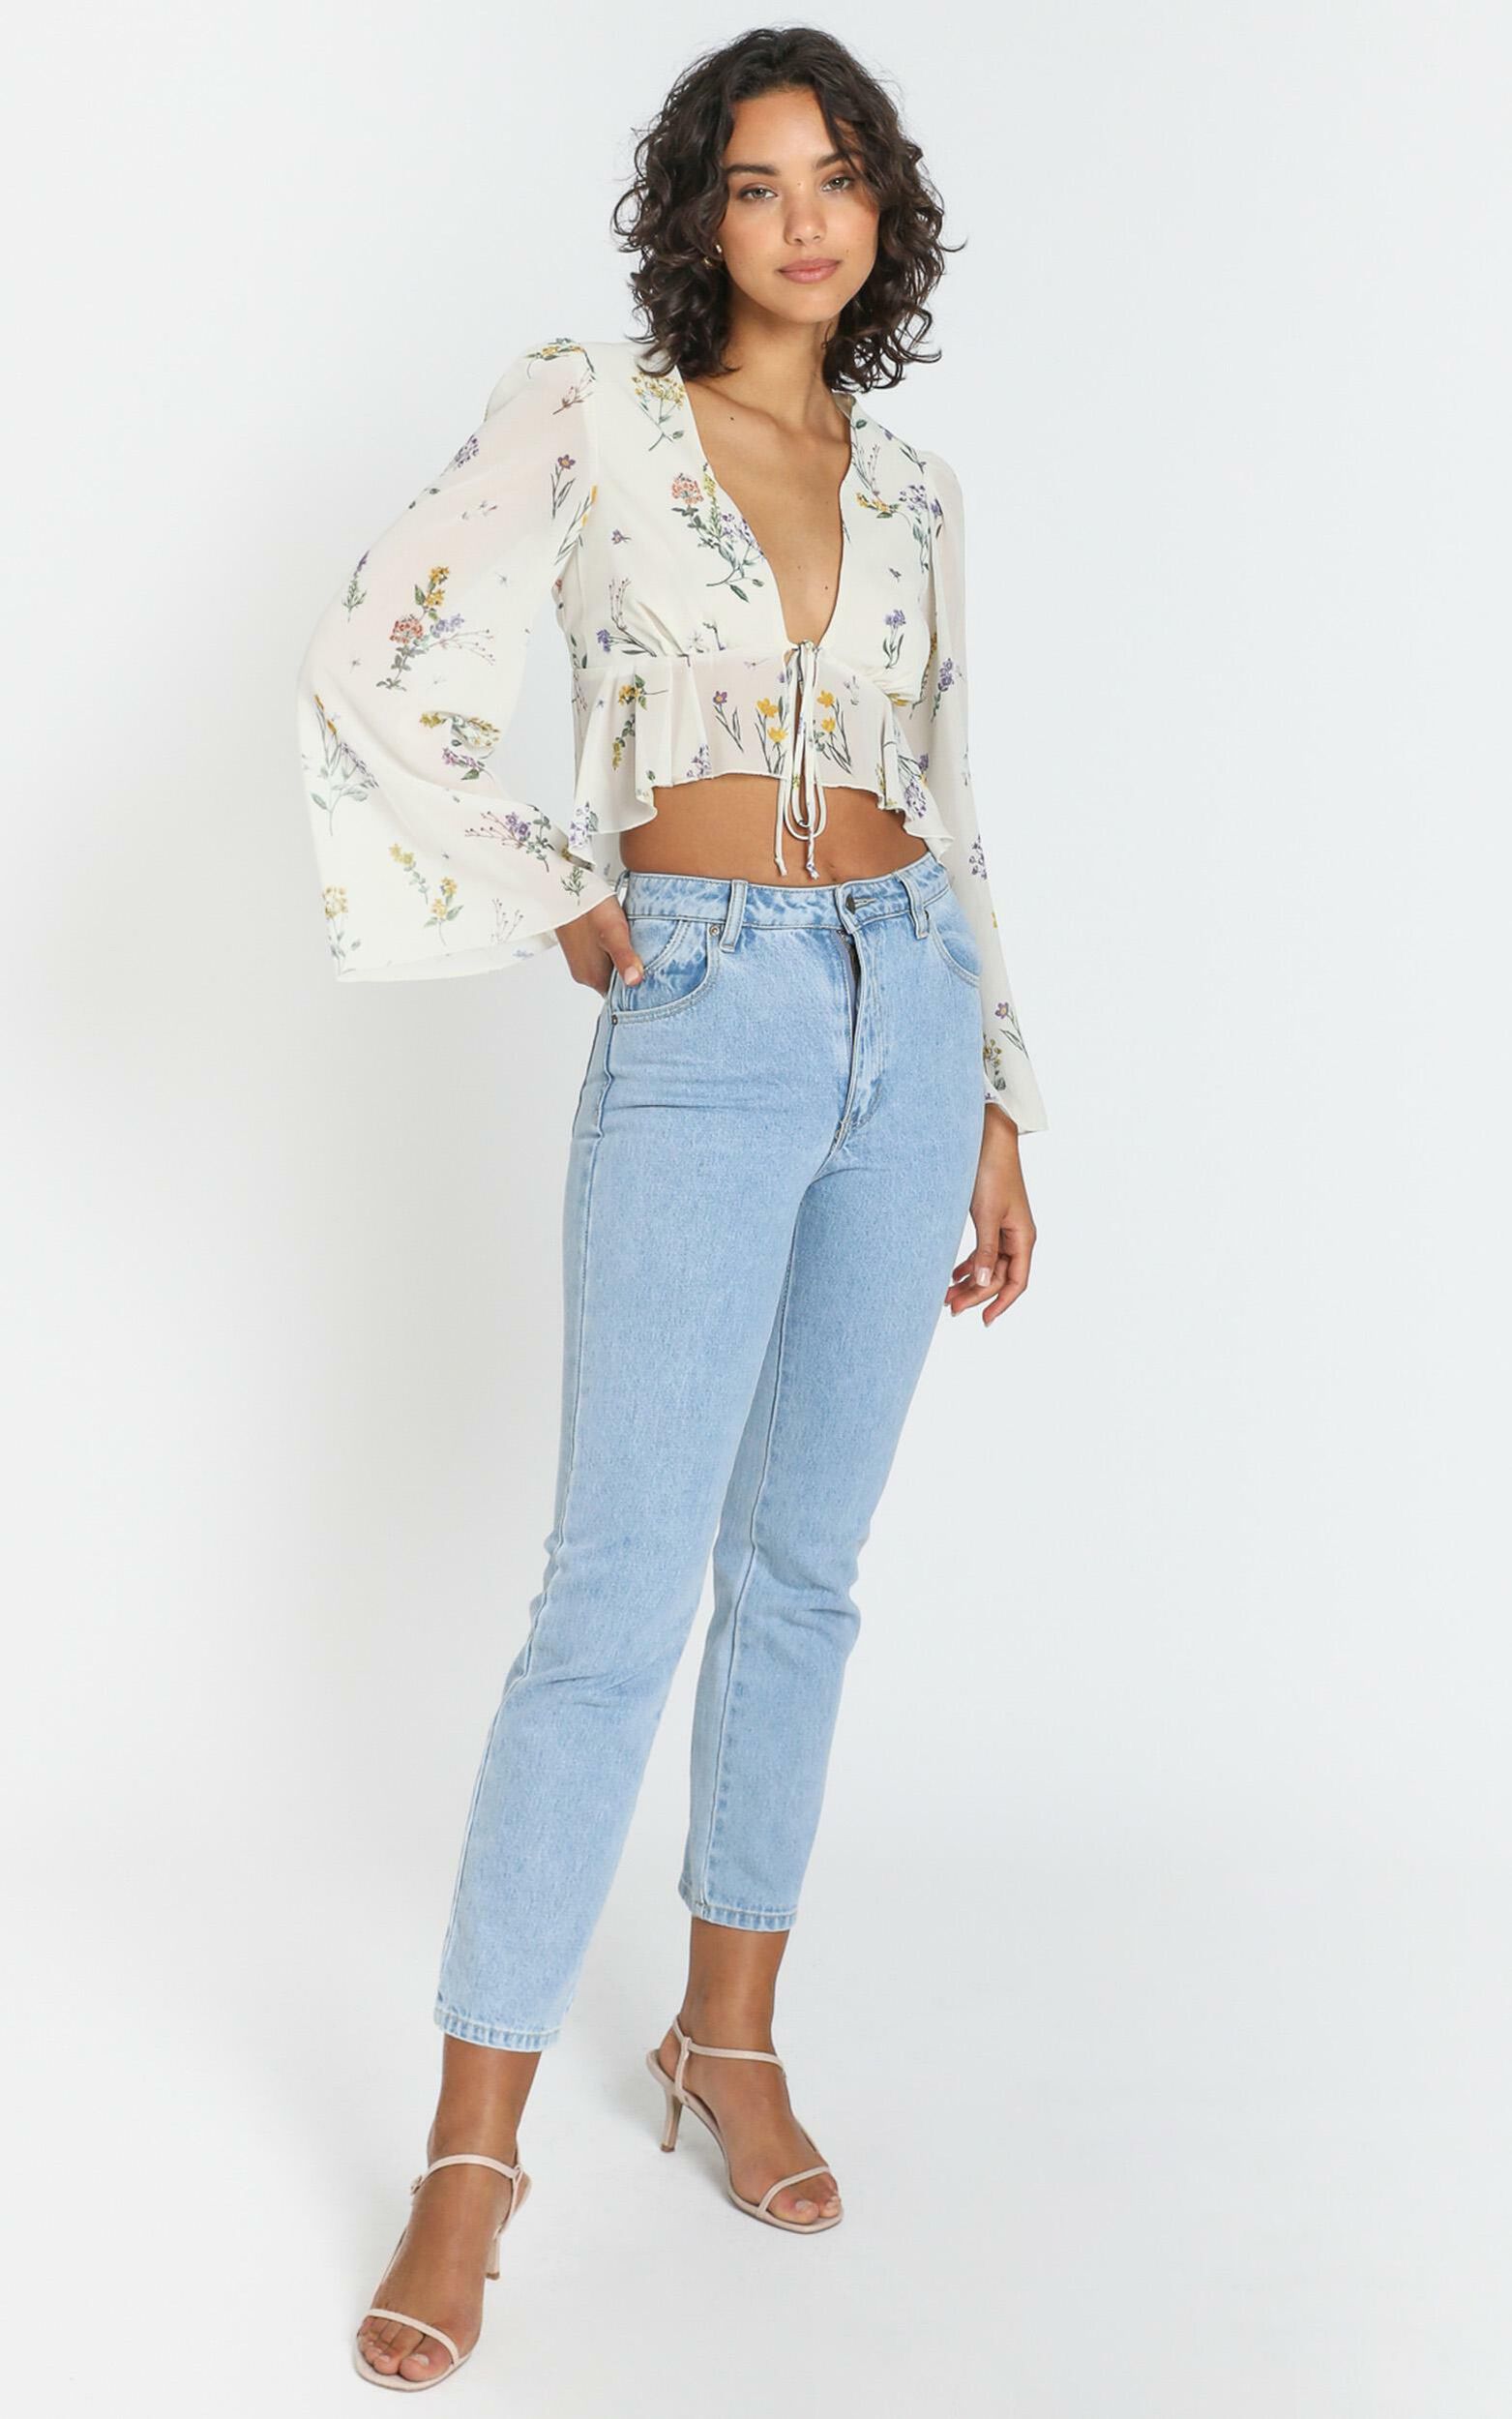 Dance It Out Top in Botanical Floral | Showpo